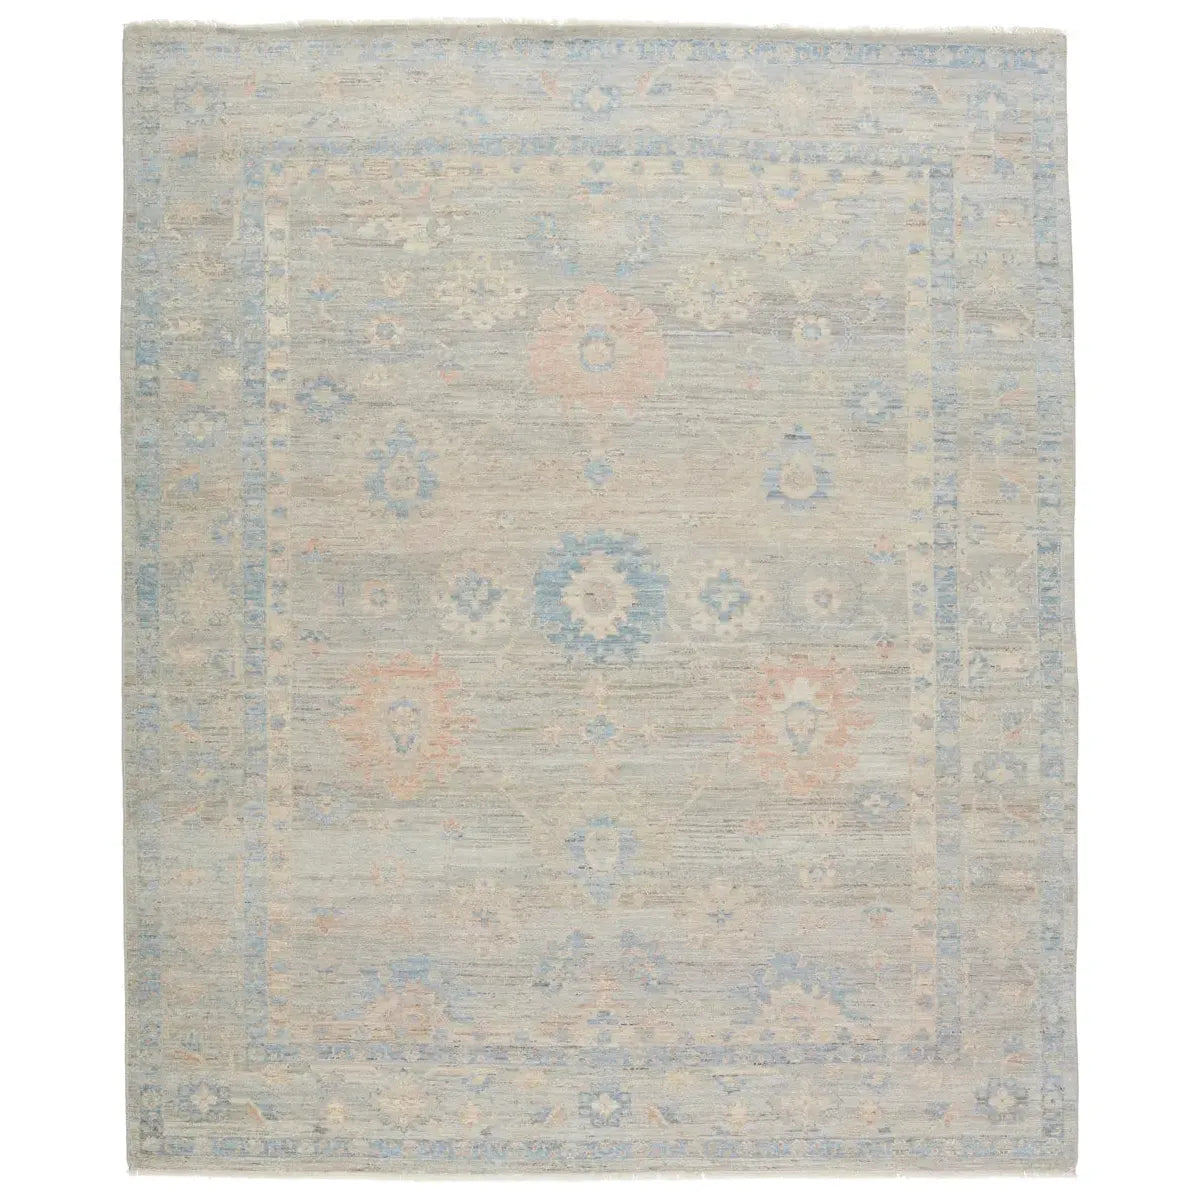 The Orenda Kerensa Rug features heirloom-quality designs of muted and uniquely updated Old World patterns. The Kerensa area rug boasts a beautifully washed medallion motif with ornate and fine-lined details. Amethyst Home provides interior design services, furniture, rugs, and lighting in the Seattle metro area.